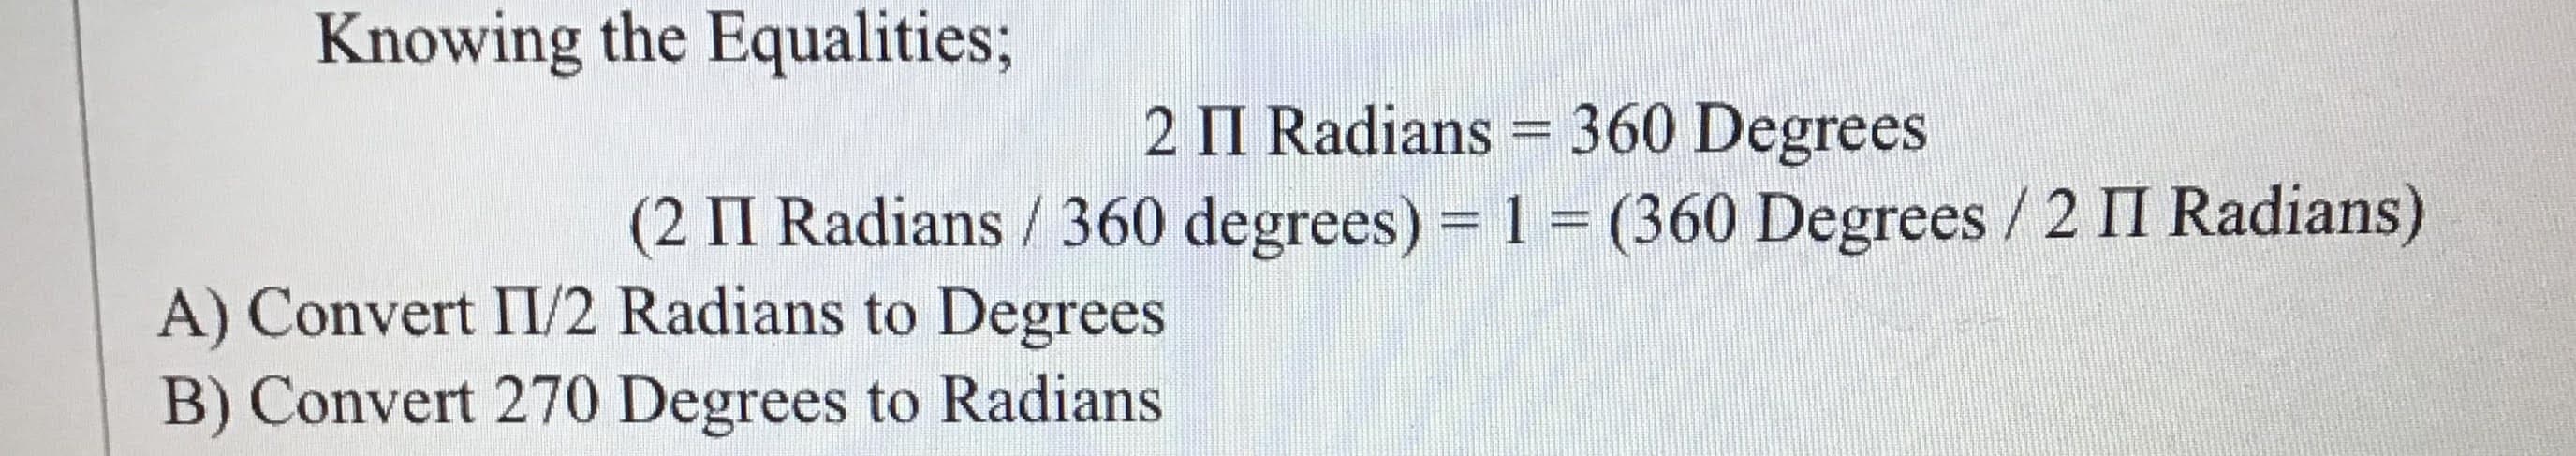 Knowing the Equalities;
2 II Radians = 360 Degrees
(2 II Radians / 360 degrees) = 1= (360 Degrees / 2 II Radians)
A) Convert II/2 Radians to Degrees
B) Convert 270 Degrees to Radians
